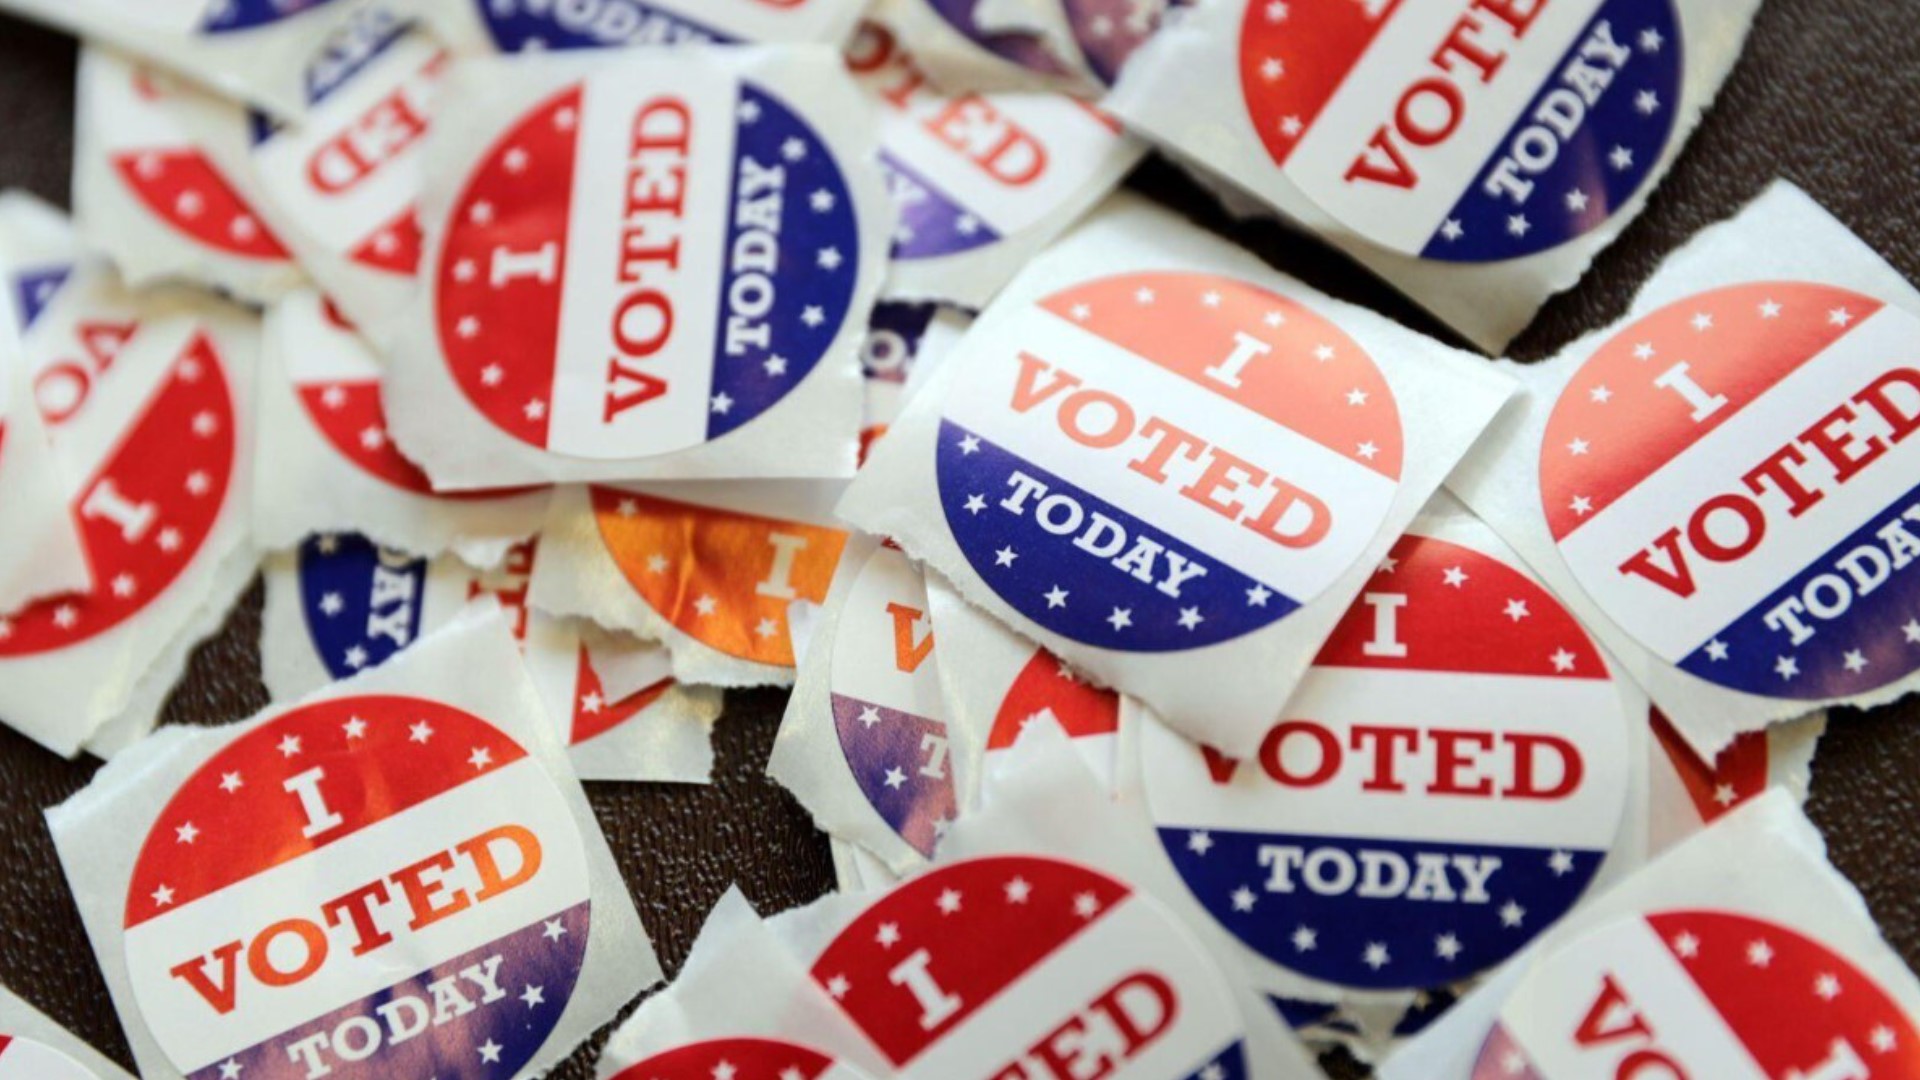 The polls opened at 7 a.m. on Tuesday to allow people to vote in Pennsylvania's primary election.